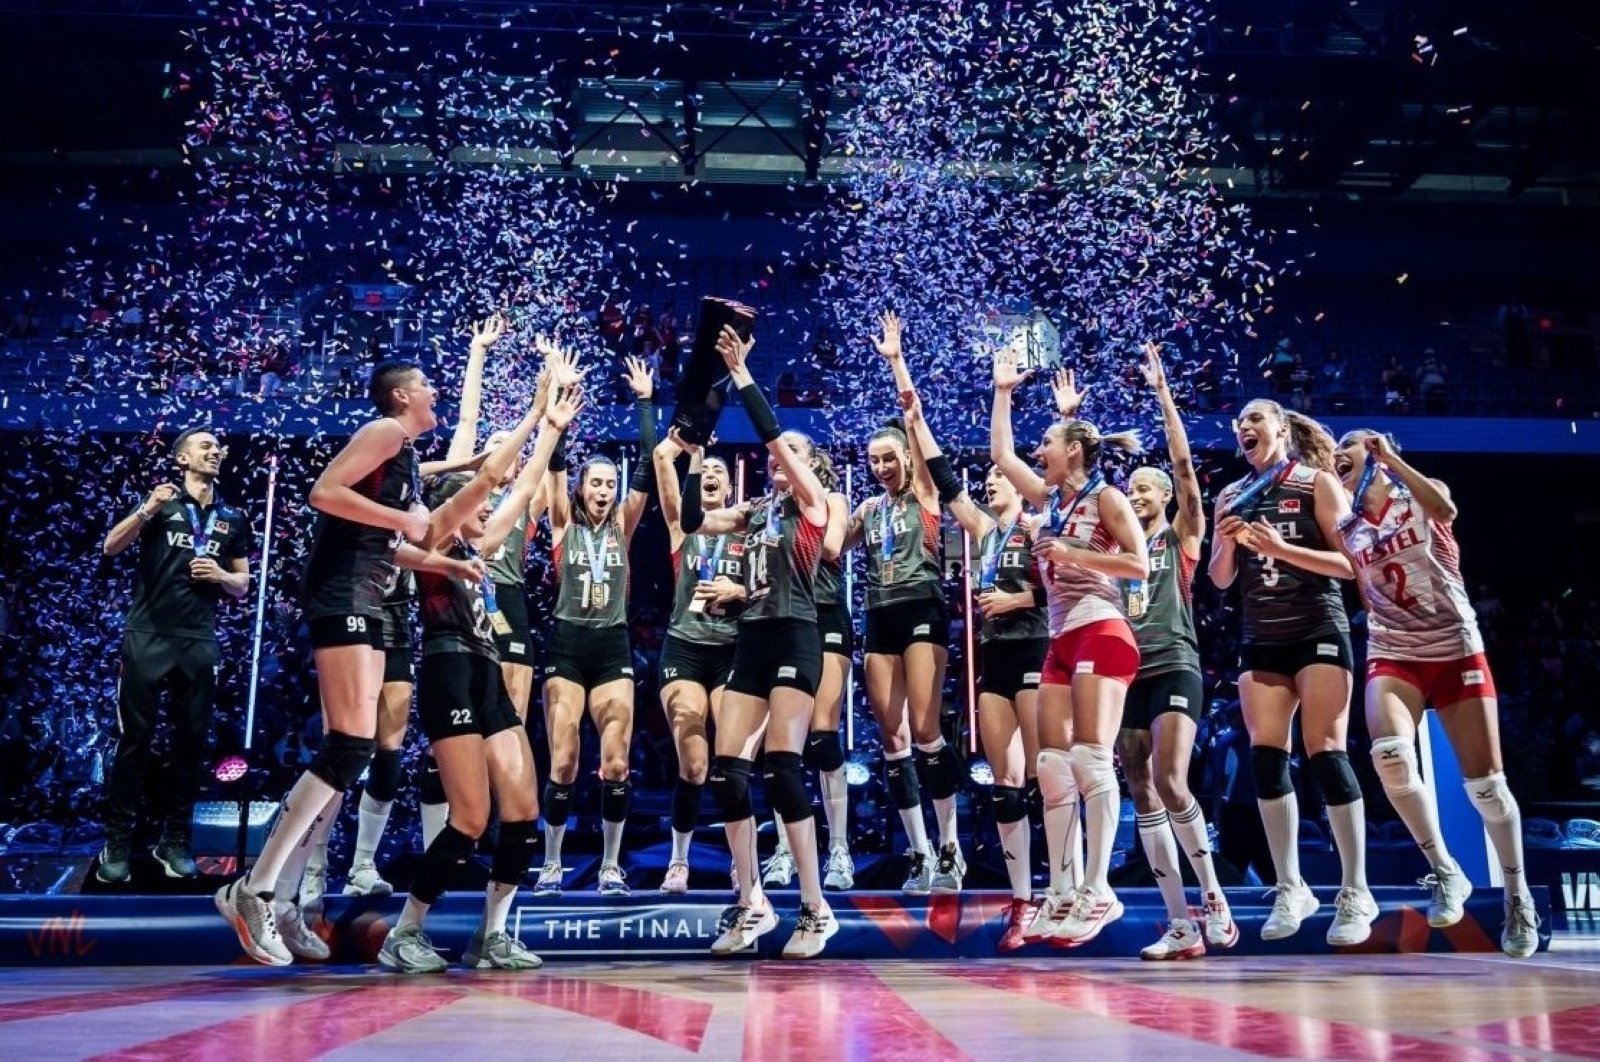 2019 fivb women's volleyball intercontinental olympic qualification tournament